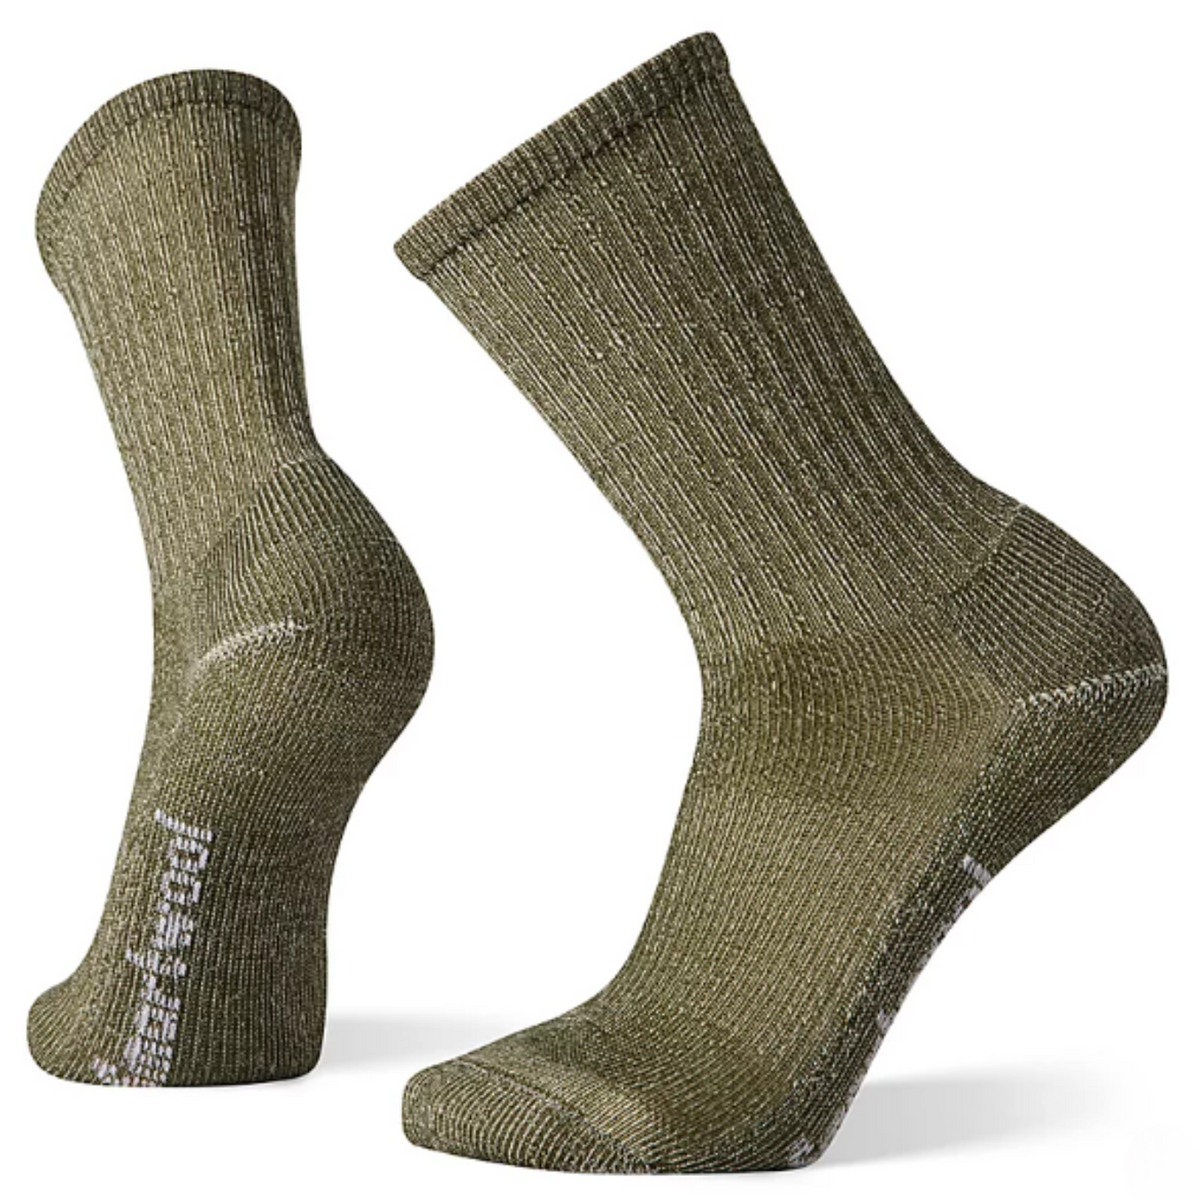 Smartwool Hike Classic Edition Light Cushion Crew men&#39;s sock featuring military olive colored sock shown on display feet. 